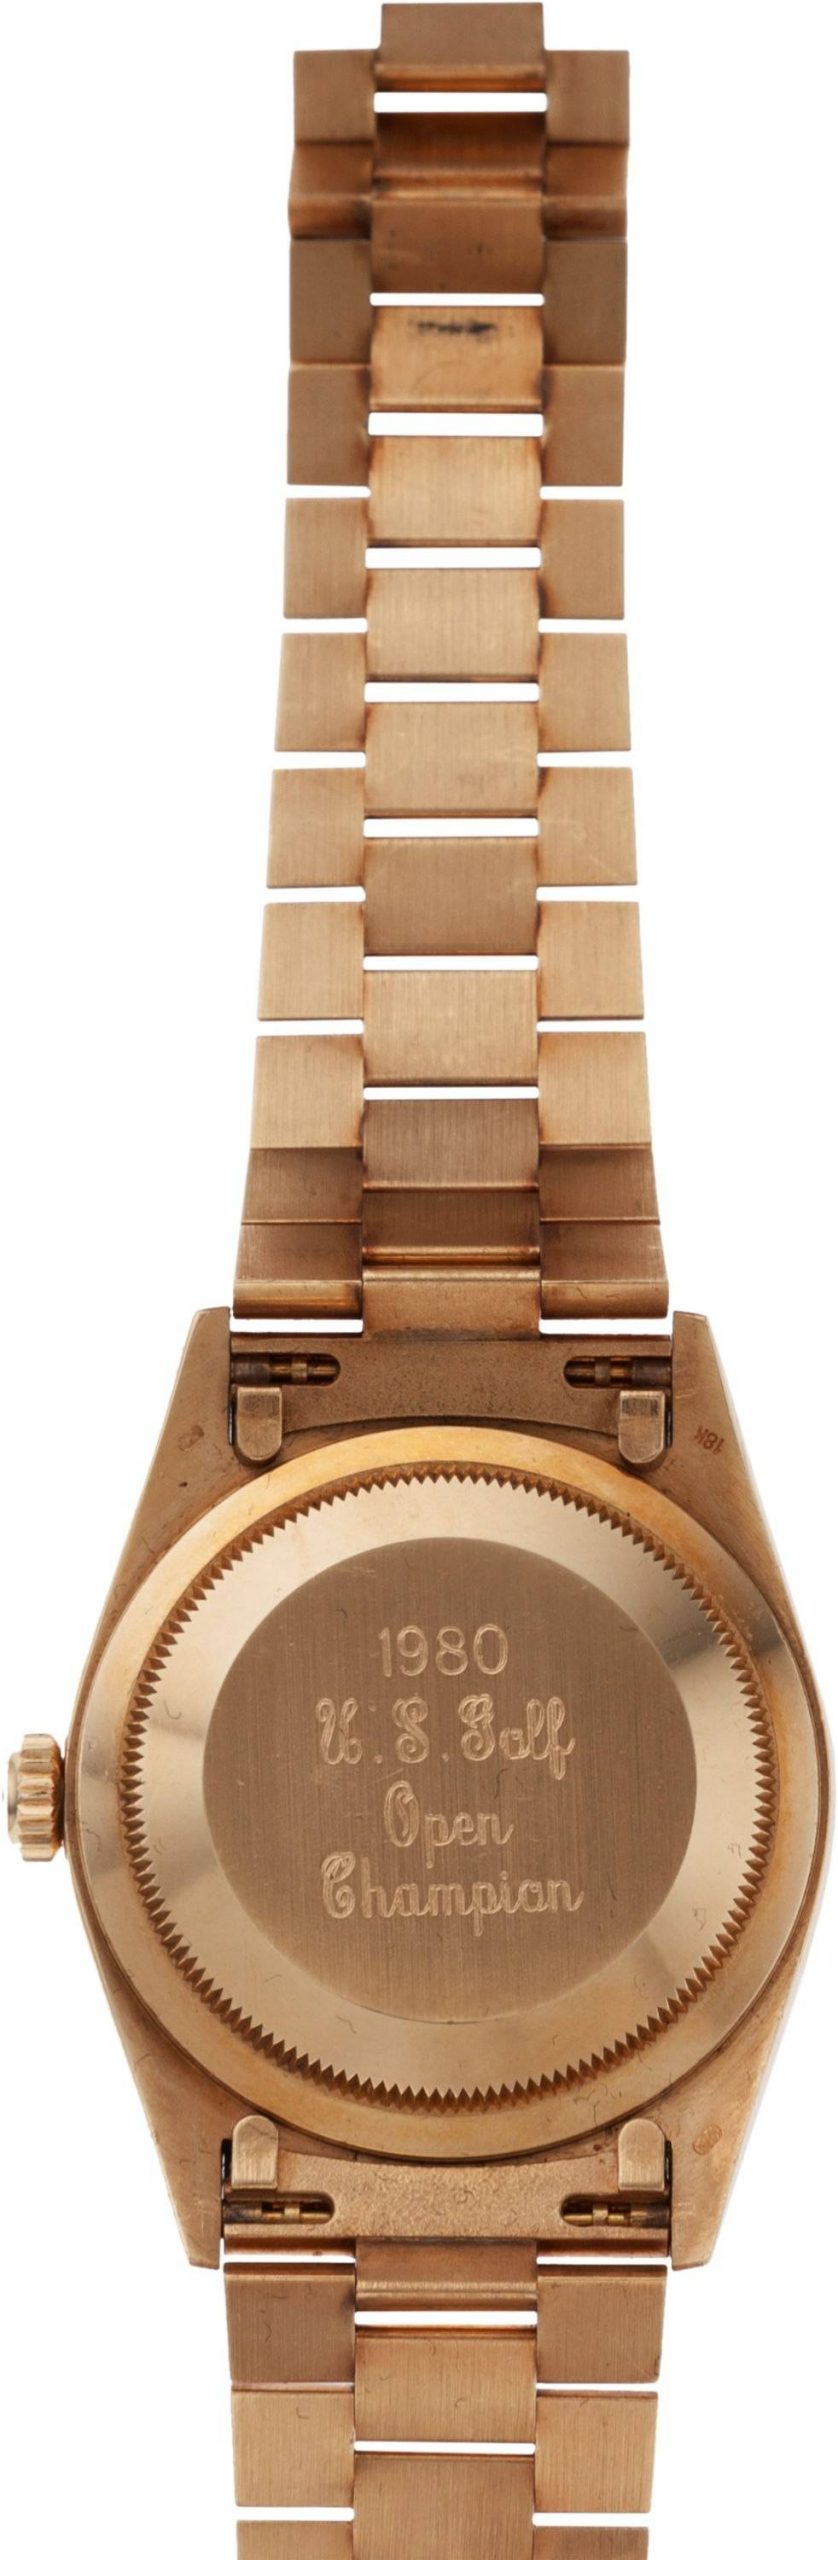 Arnold Palmer’s Rolex Set to Be Auctioned